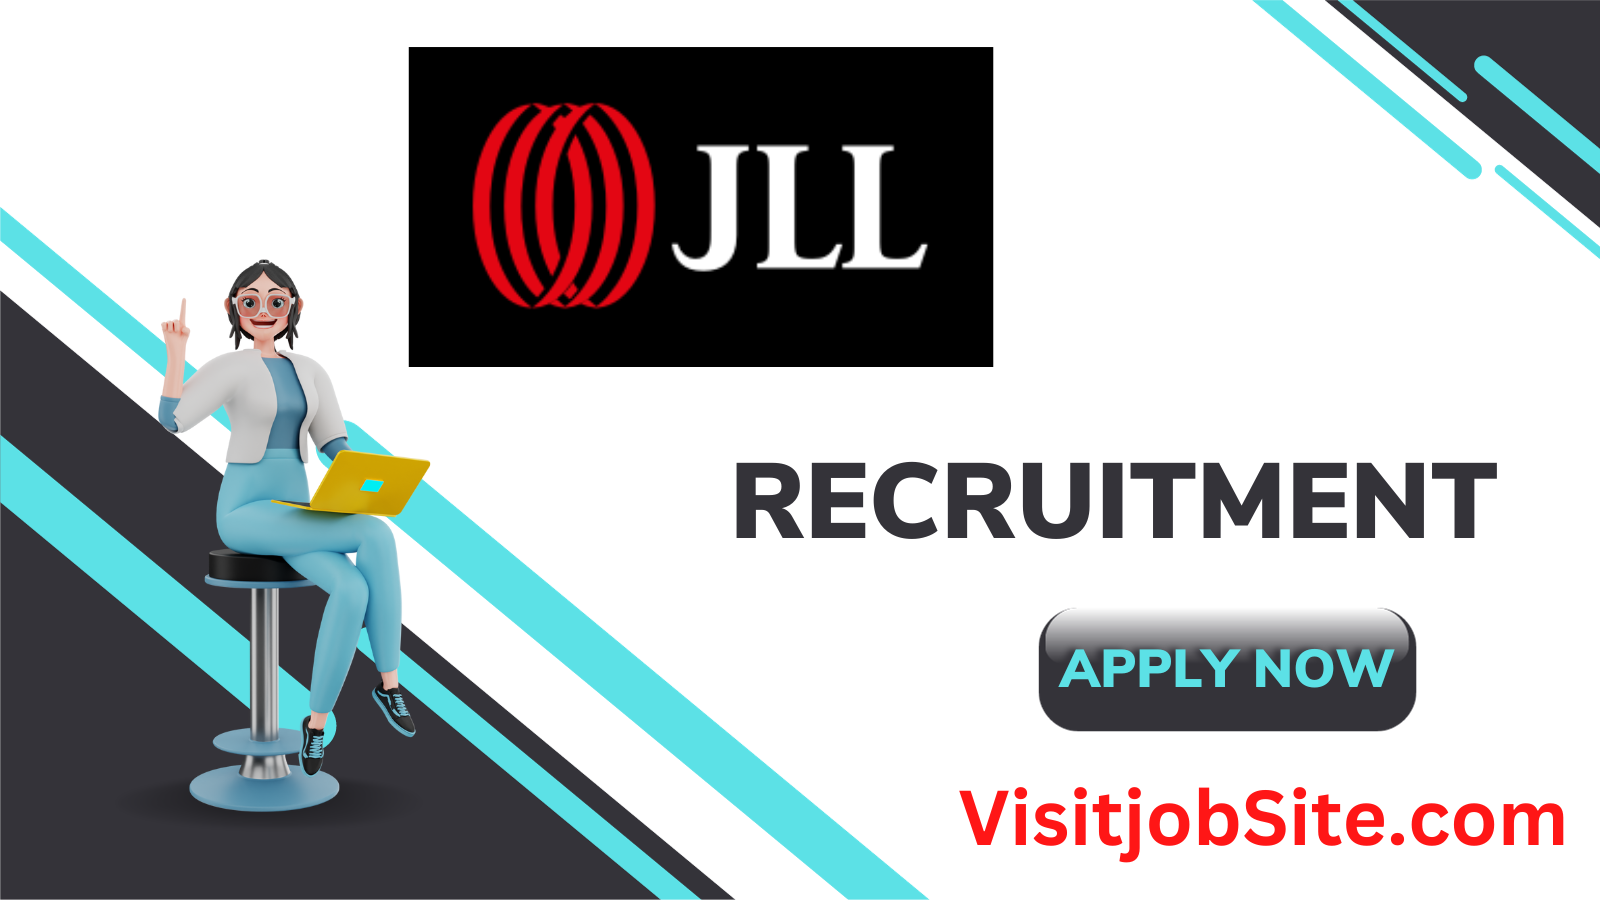 JLL Off Campus Drive